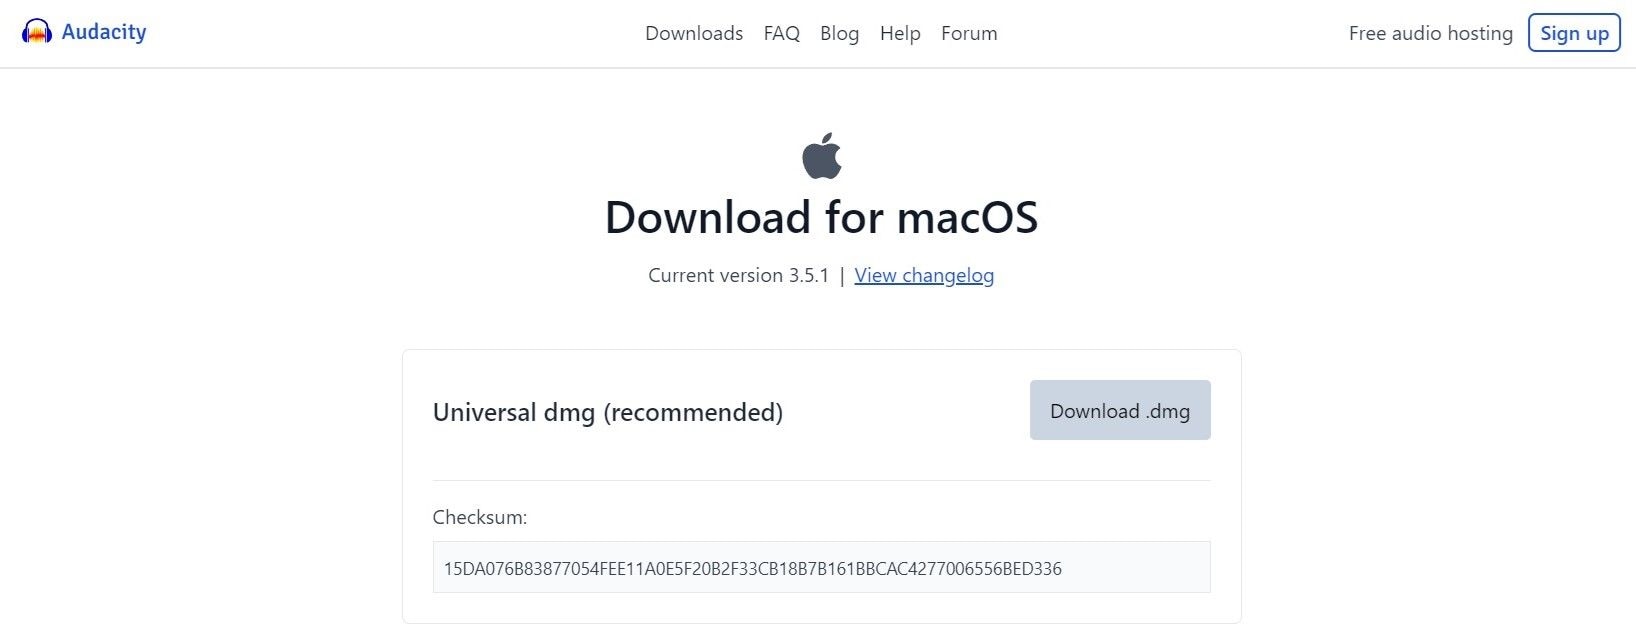 download the audacity dmg for mac